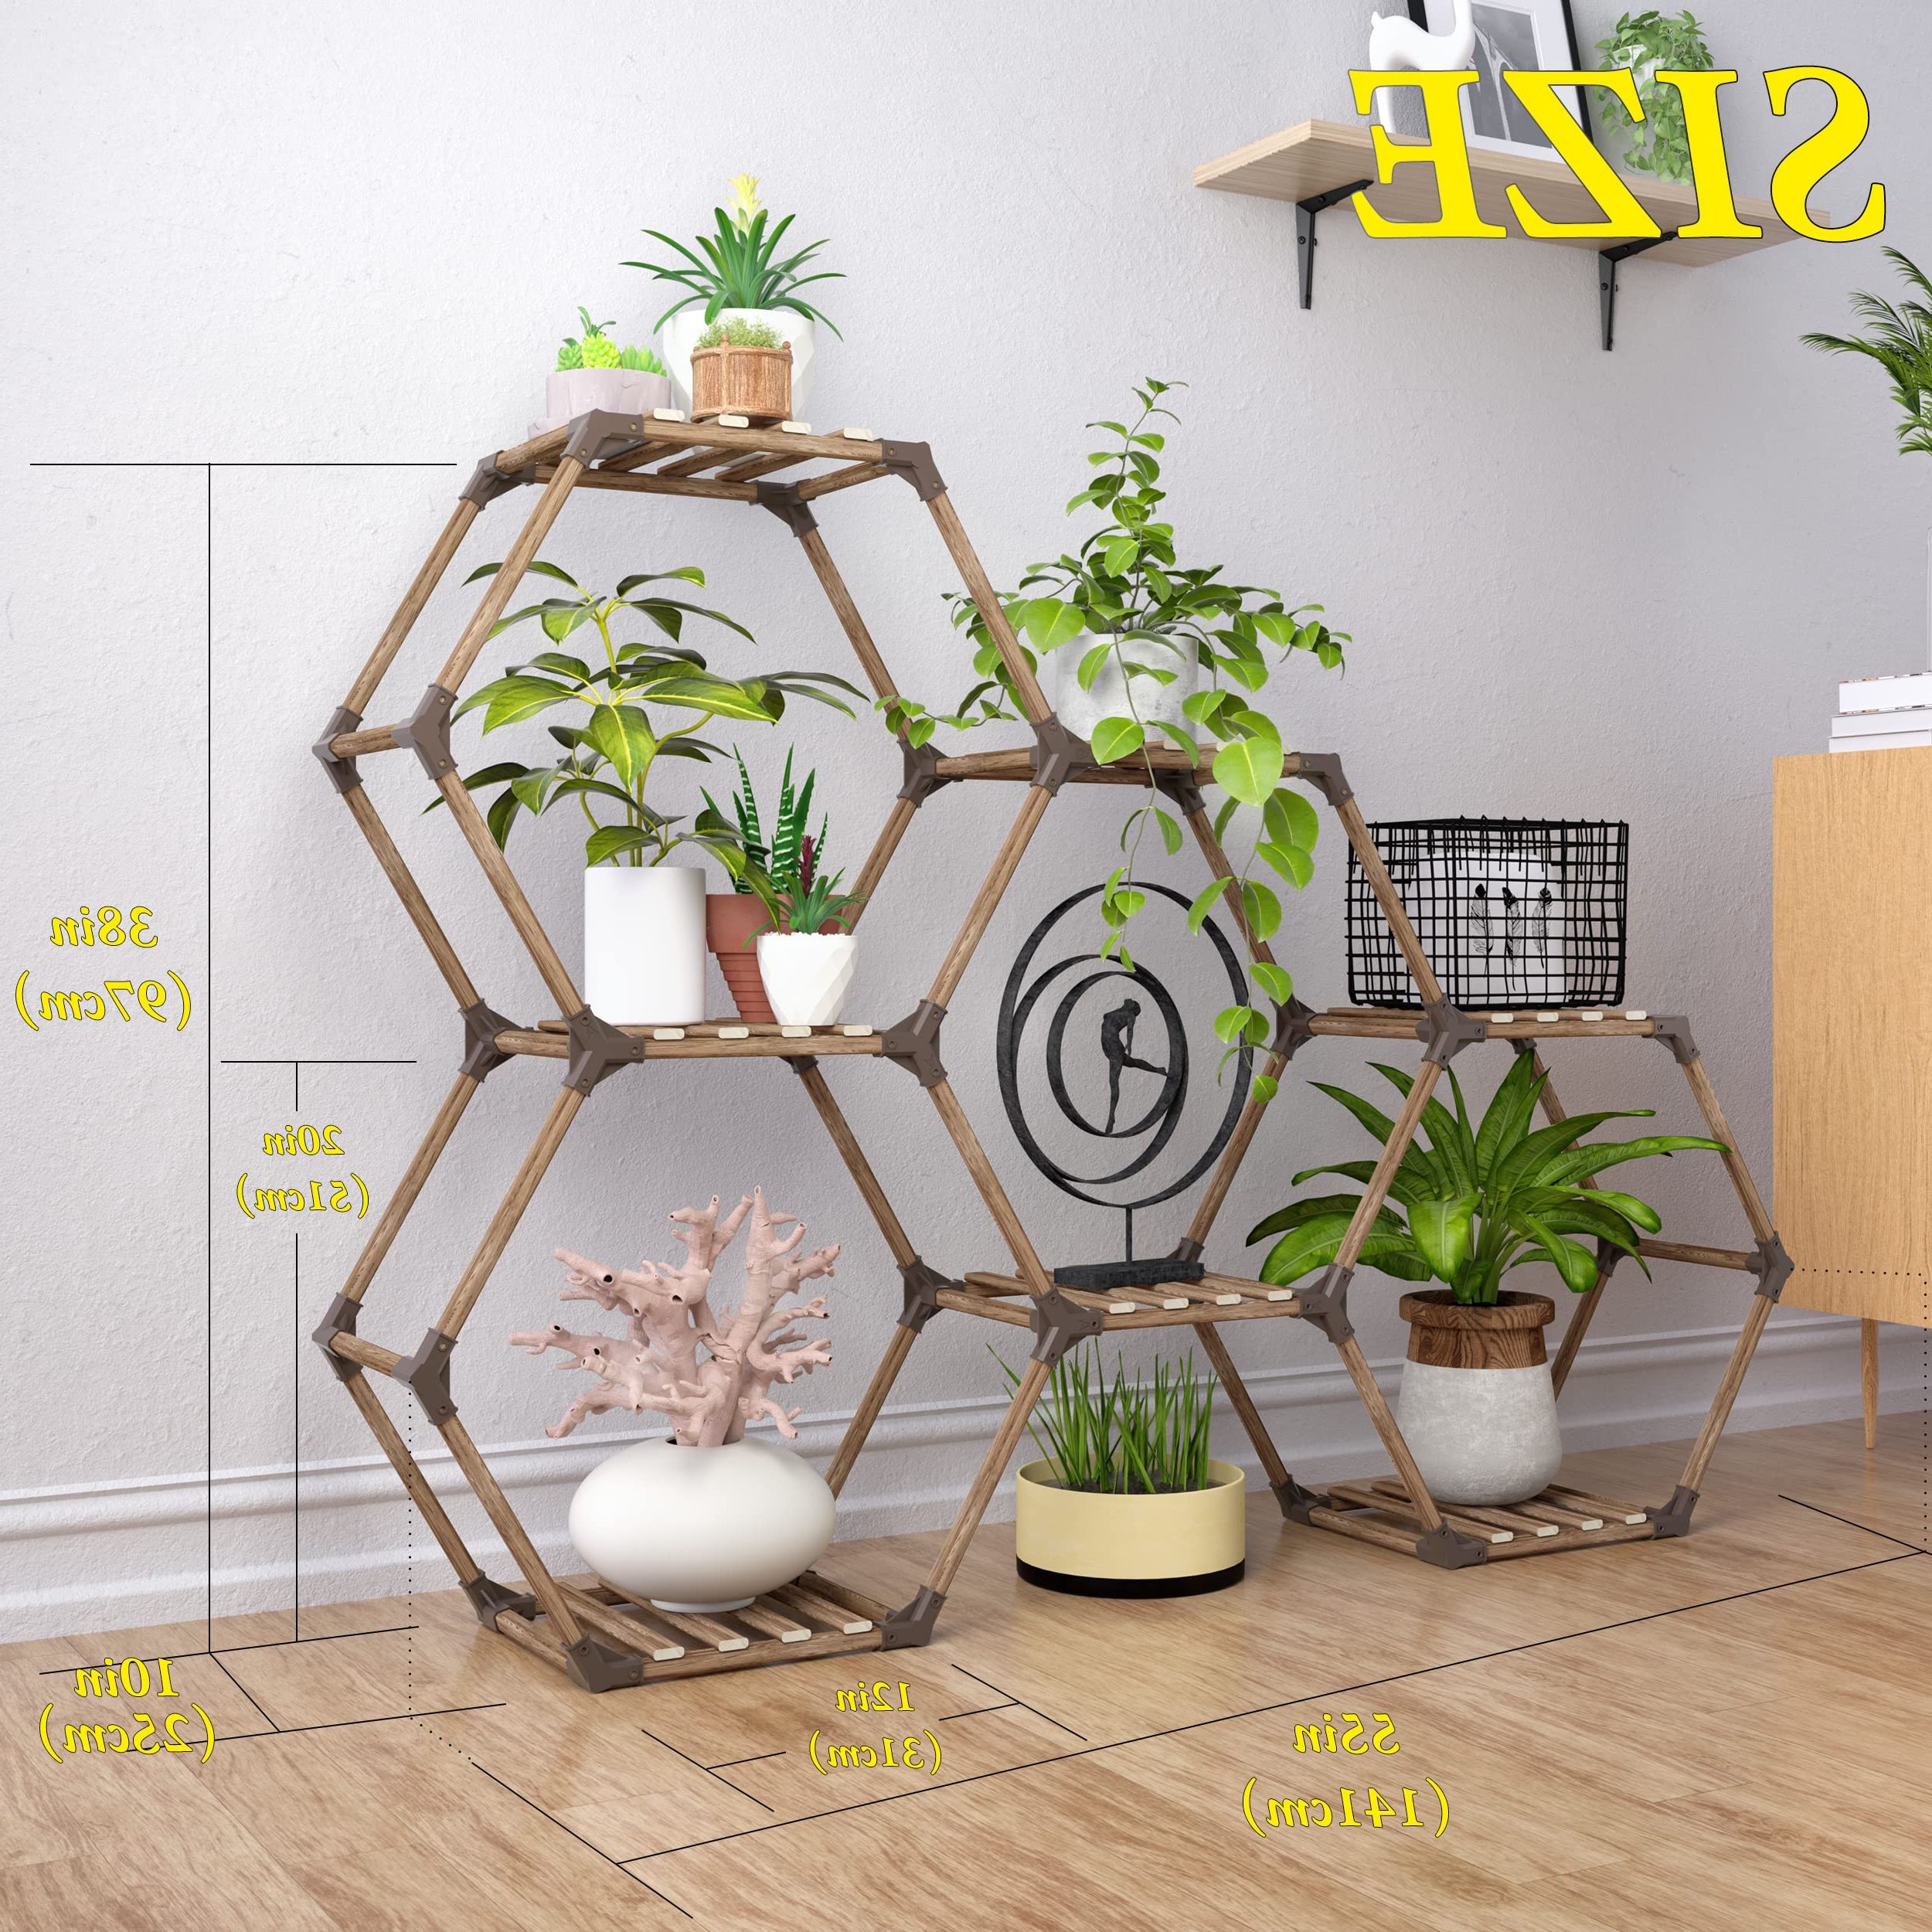 Widely Used Hexagon Plant Stands In Tikea Plant Stand Indoor Hexagonal Plant Stand For Multiple Plants Indoor  Outdoor Large Wooden Plant Shelf Creative Diy 7 Tiered Flowers Stand Rack  For Living Room Balcony Patio Window (View 11 of 15)